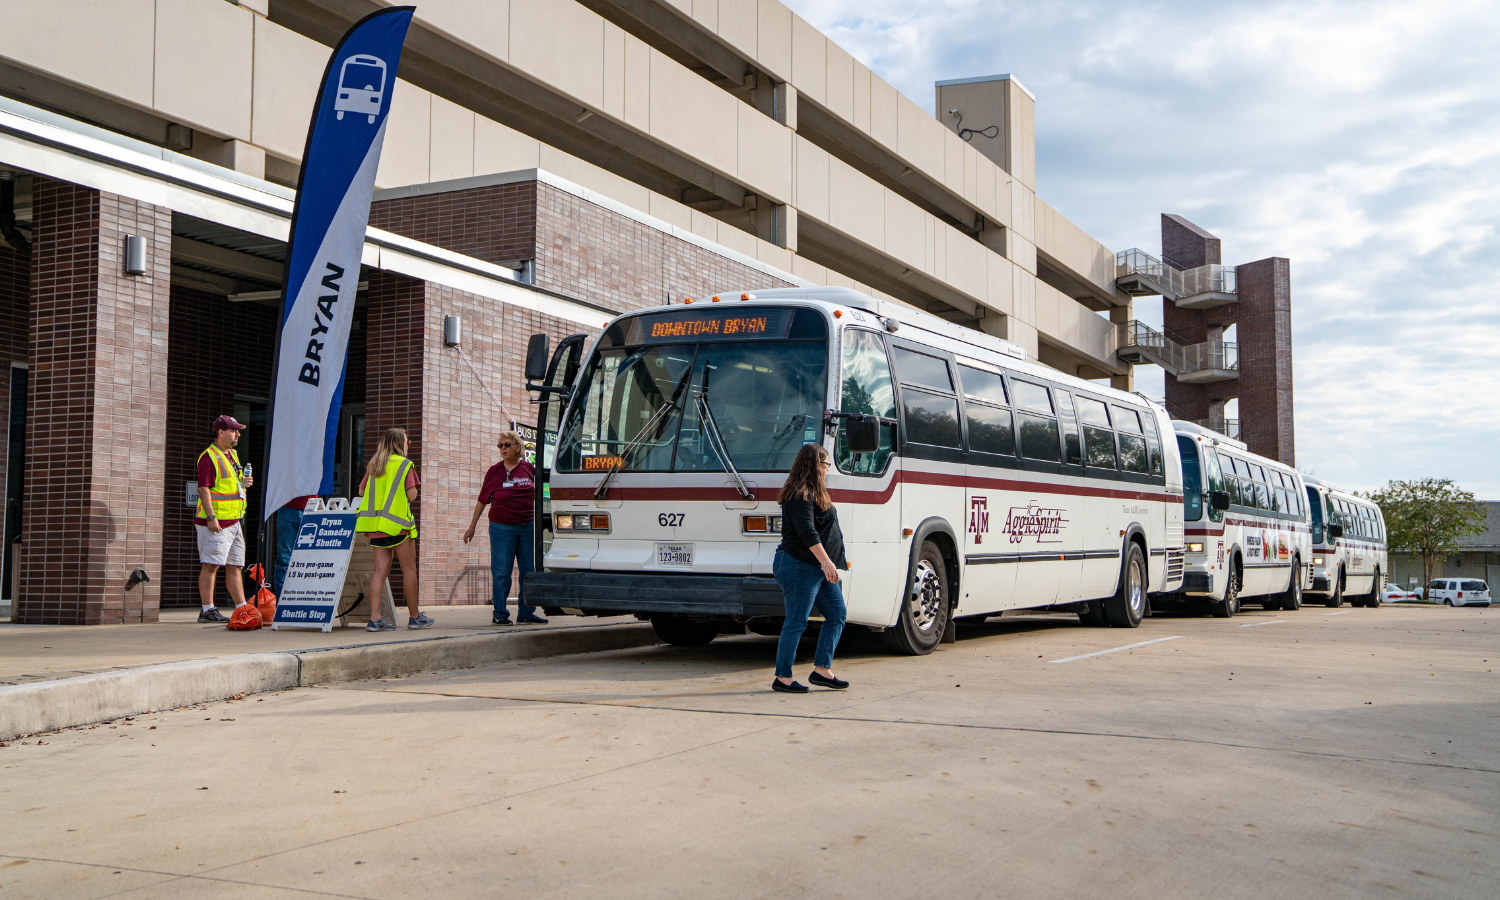 Gameday shuttle bus in Downtown Bryan